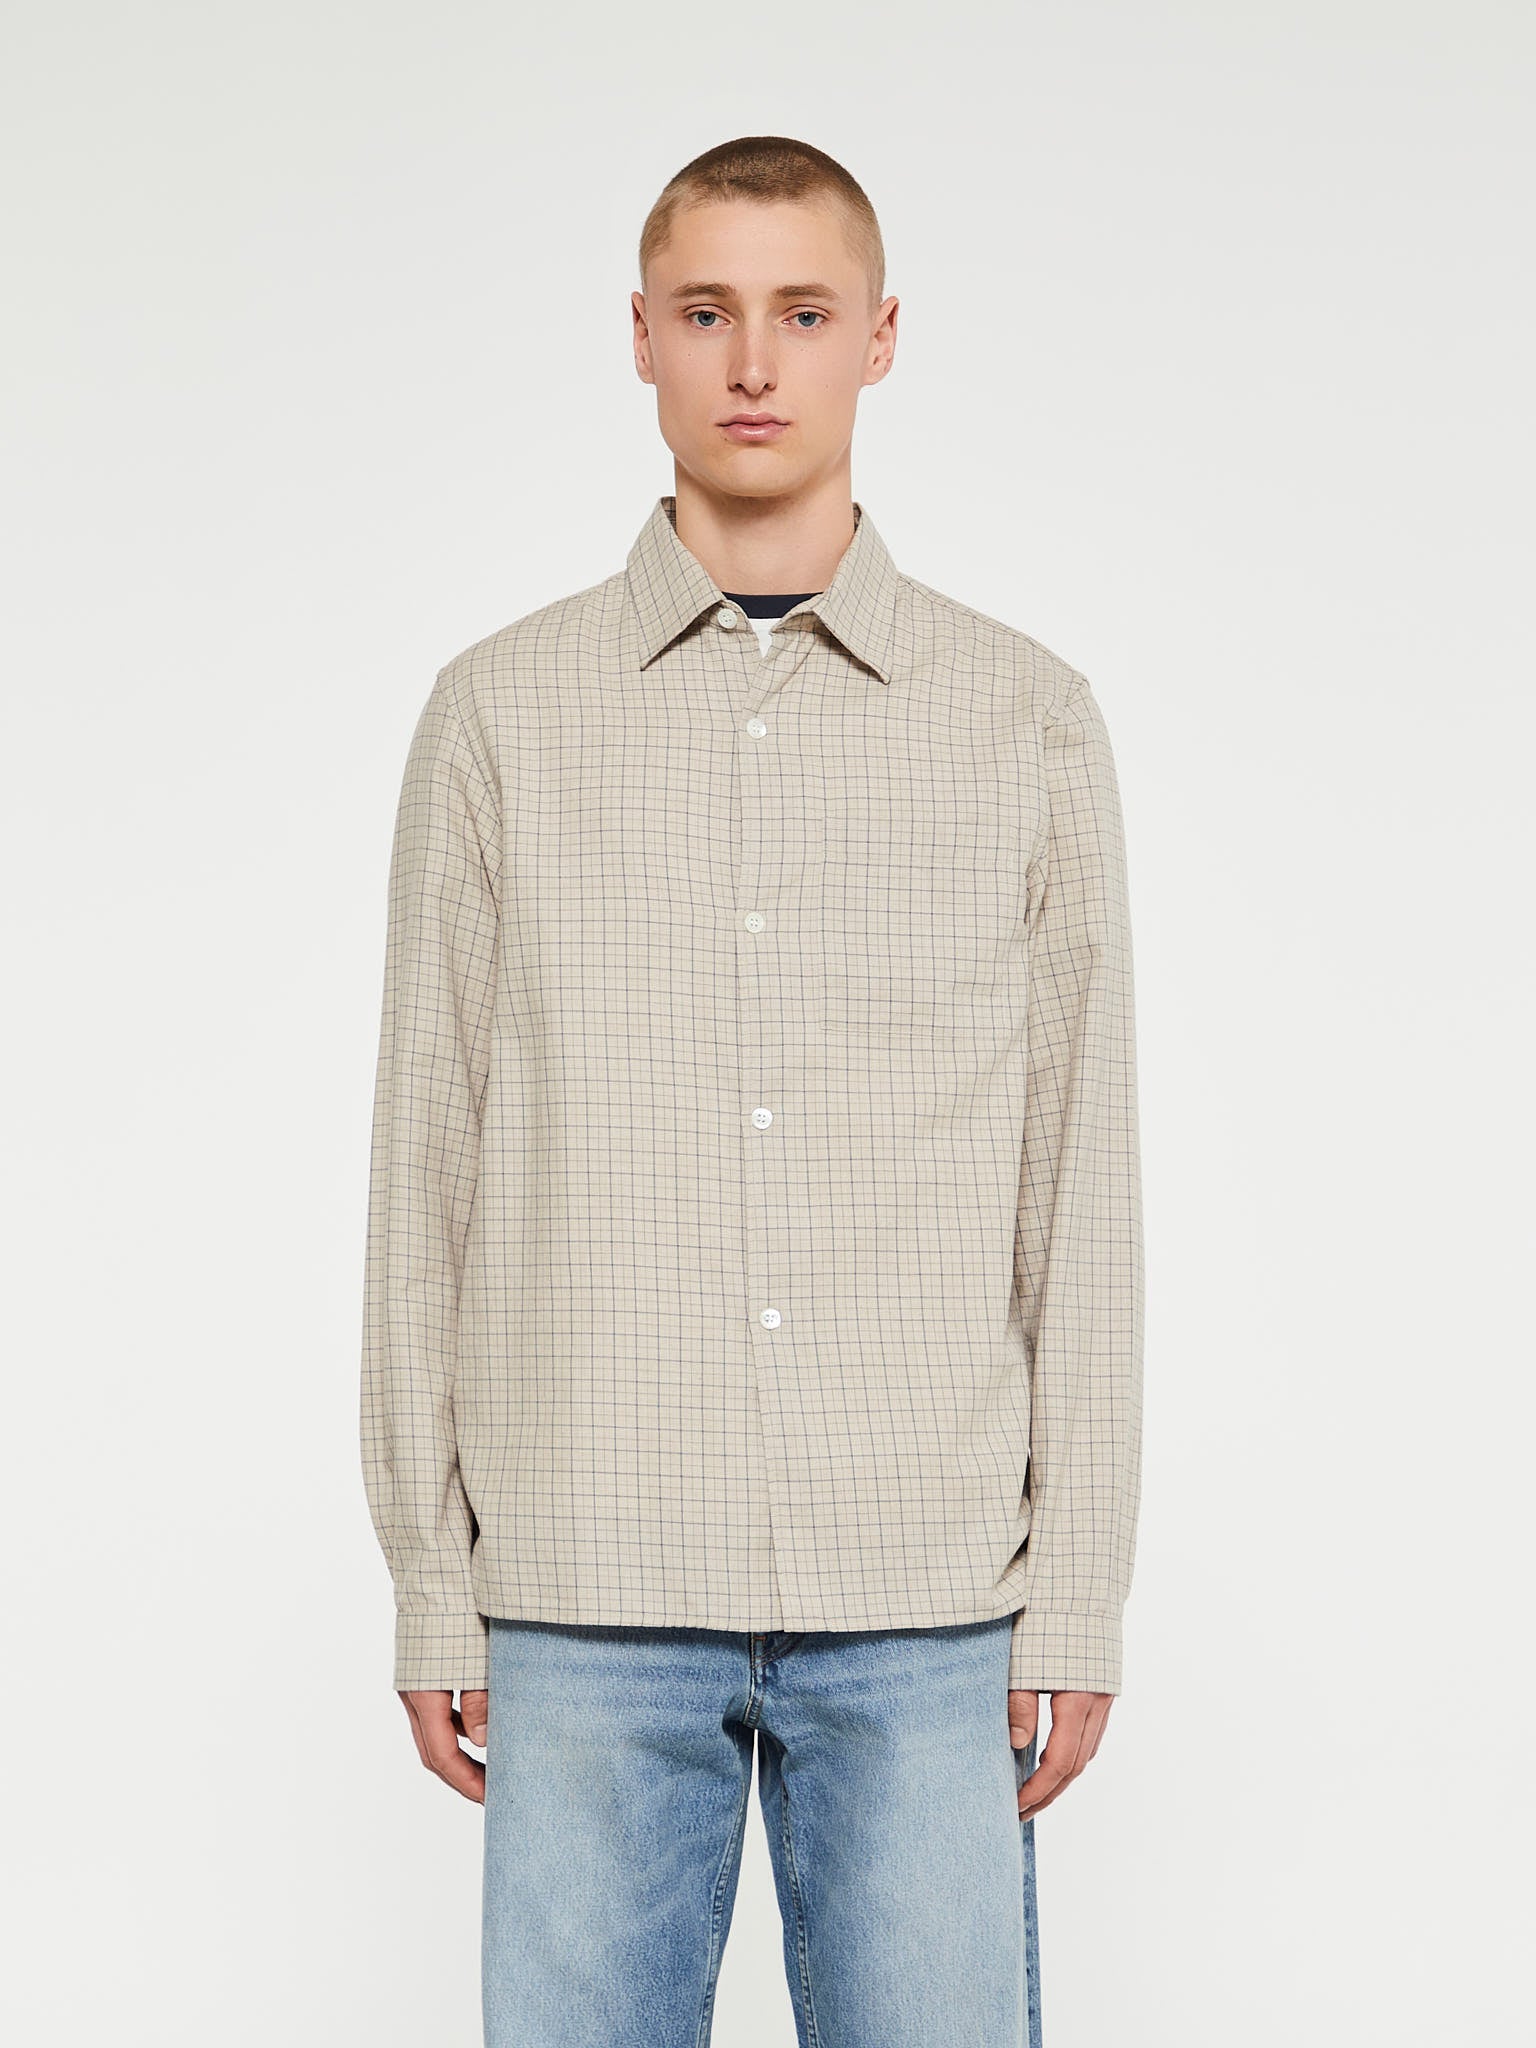 Another Aspect - Another Shirt 4.0 in Blue and Beige Check